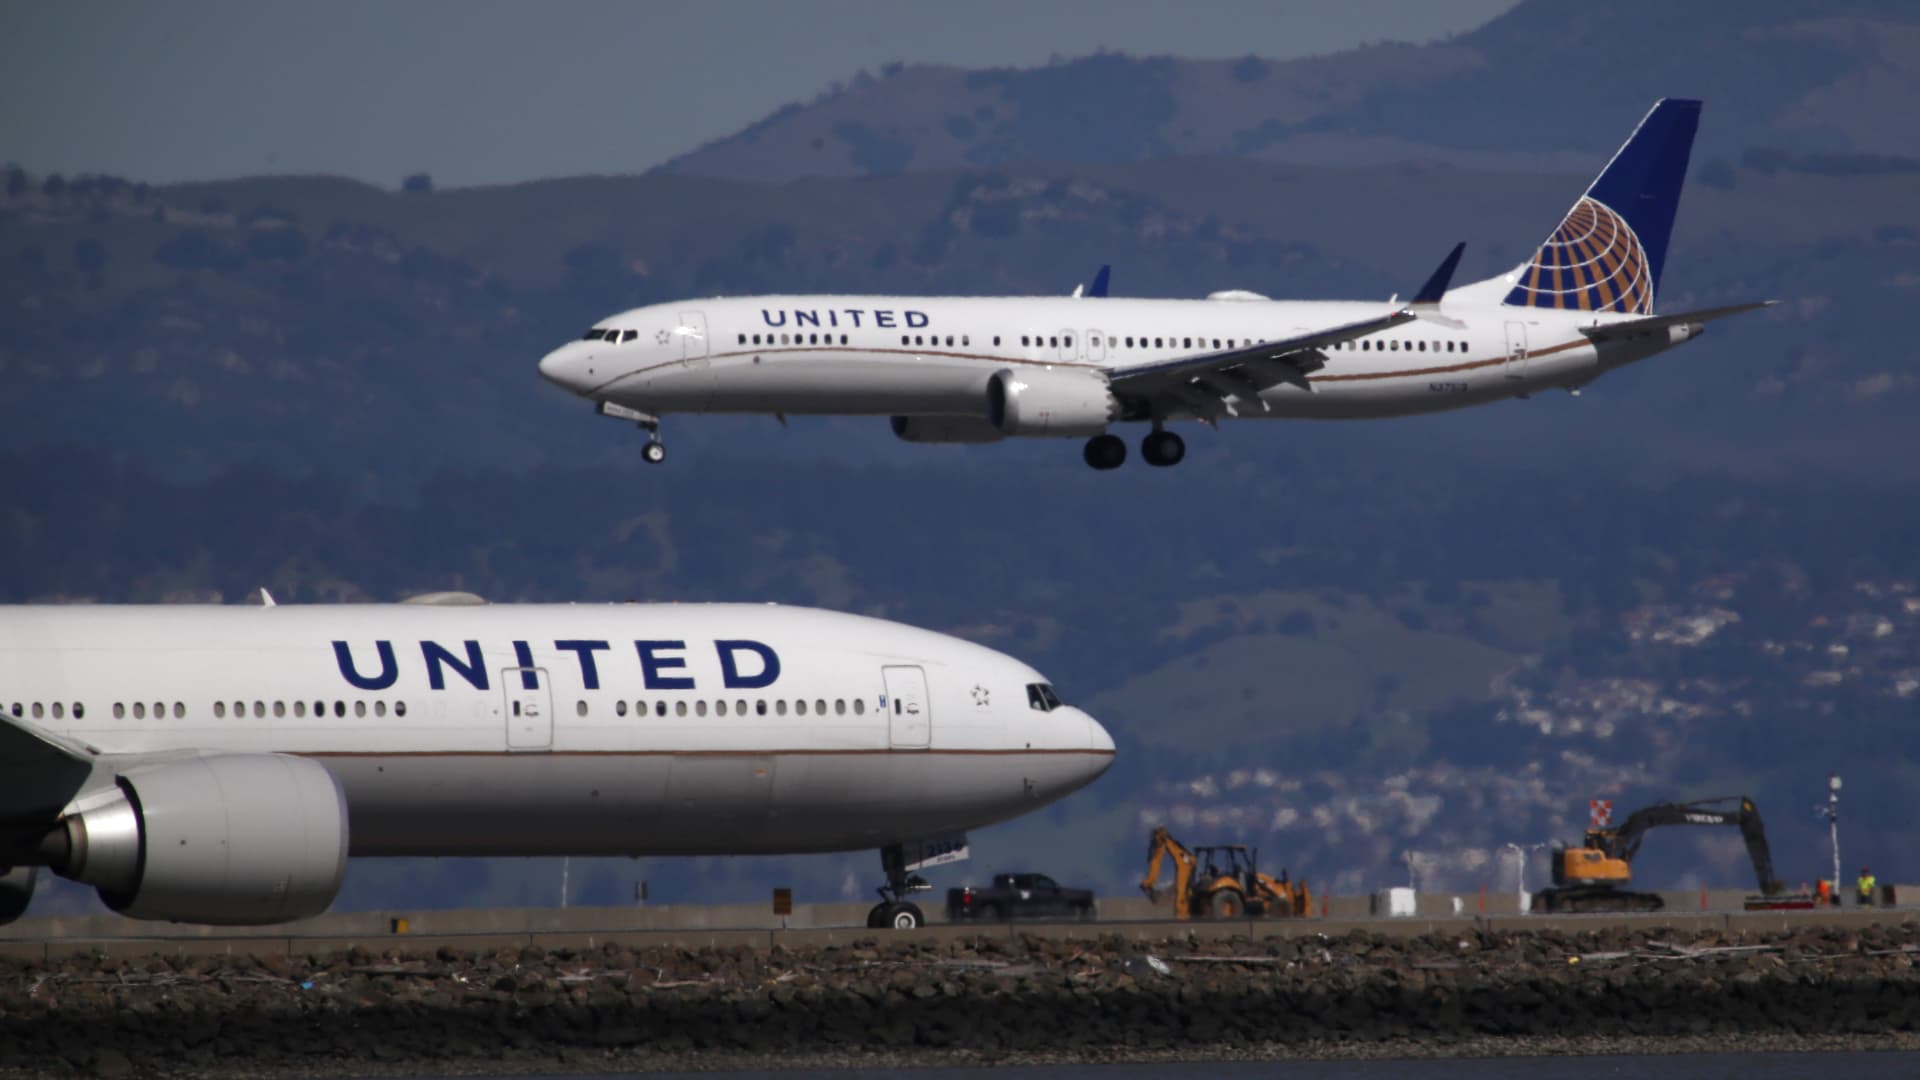 United Airlines Takes $200 Million Hit from Boeing 737 Max 9 Grounding: Loss of 86 Planes and Delayed Deliveries